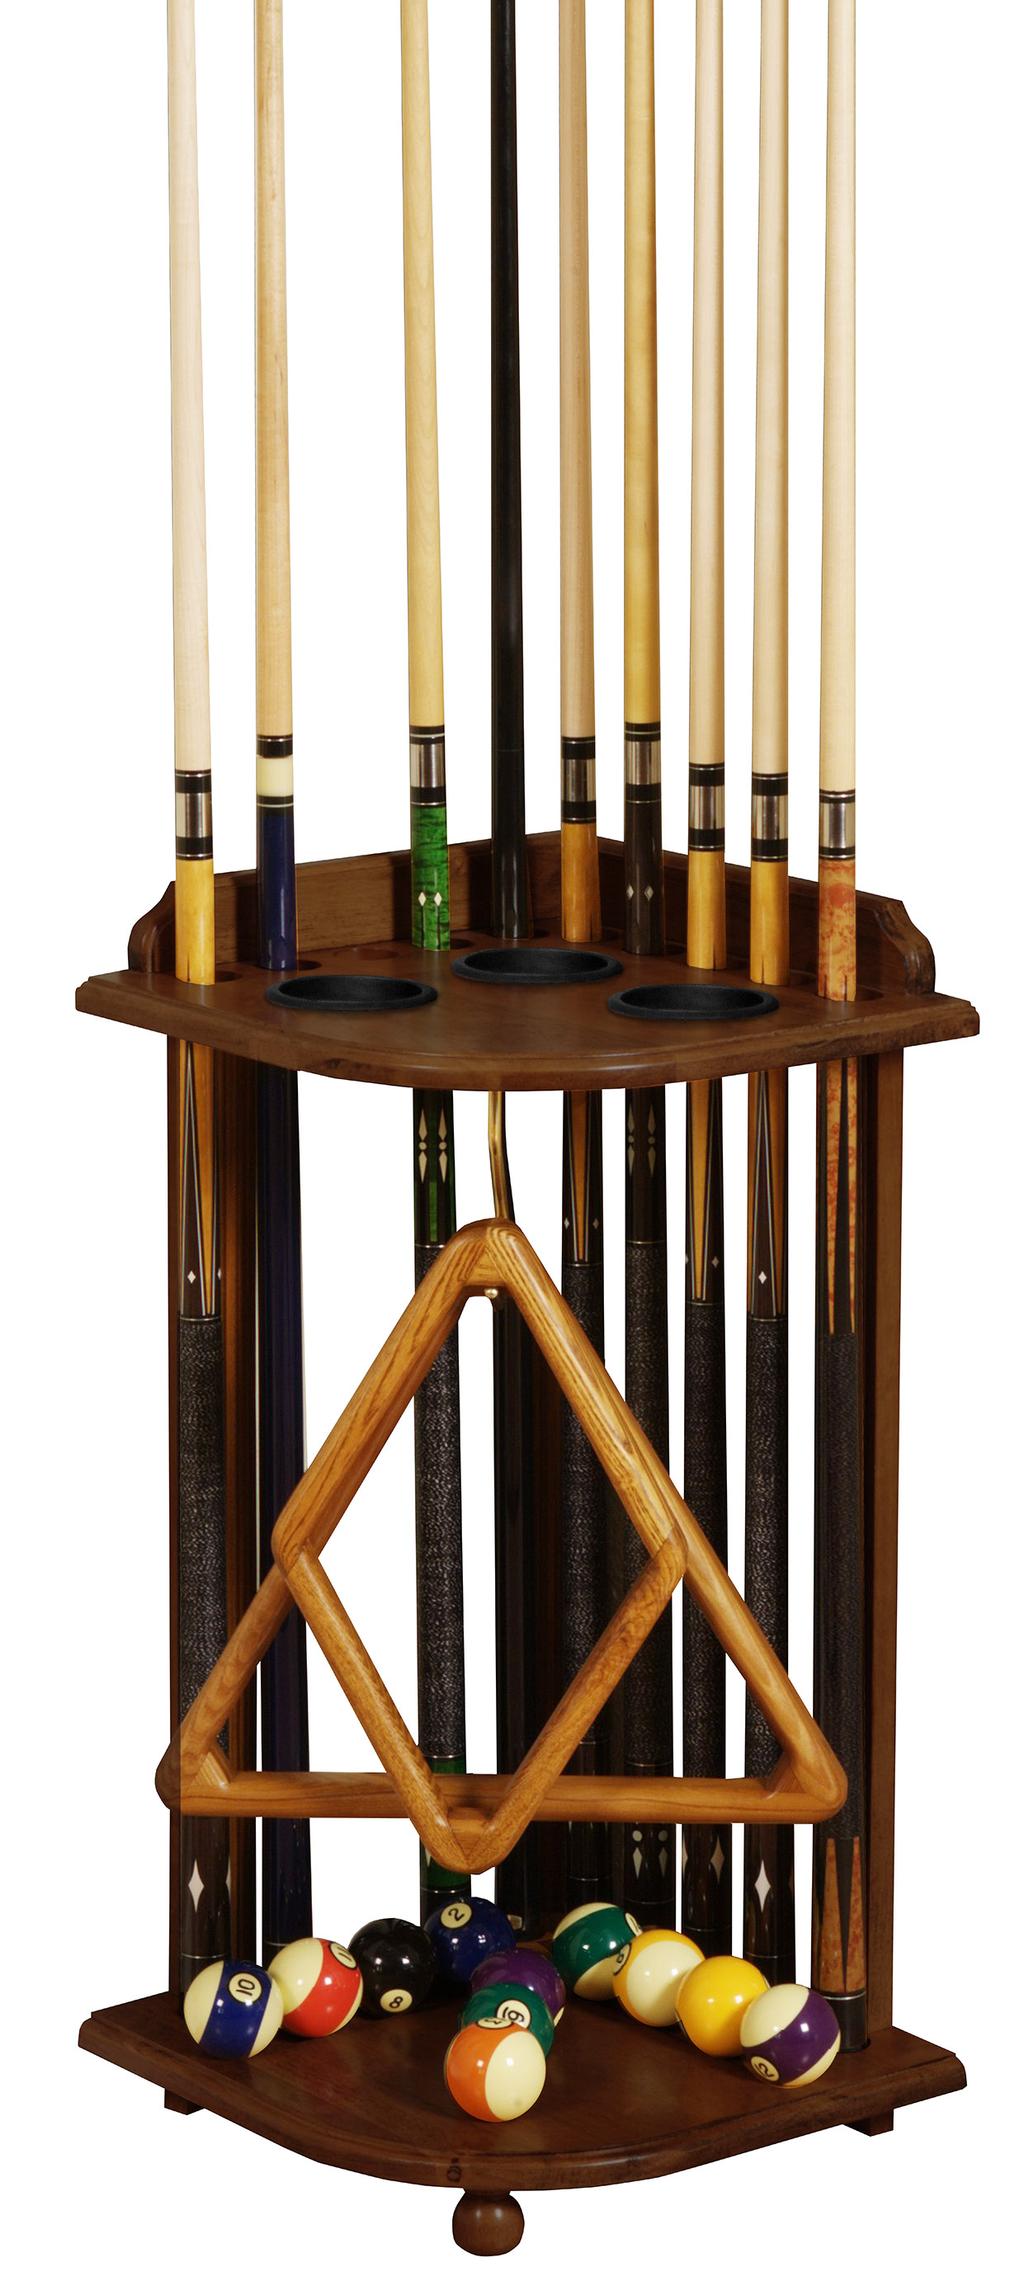 CORNER CUE RACK The Heritage Corner Rack is designed with you in mind. Store up to 10 cues, ball rack and balls in the corner out of the way.